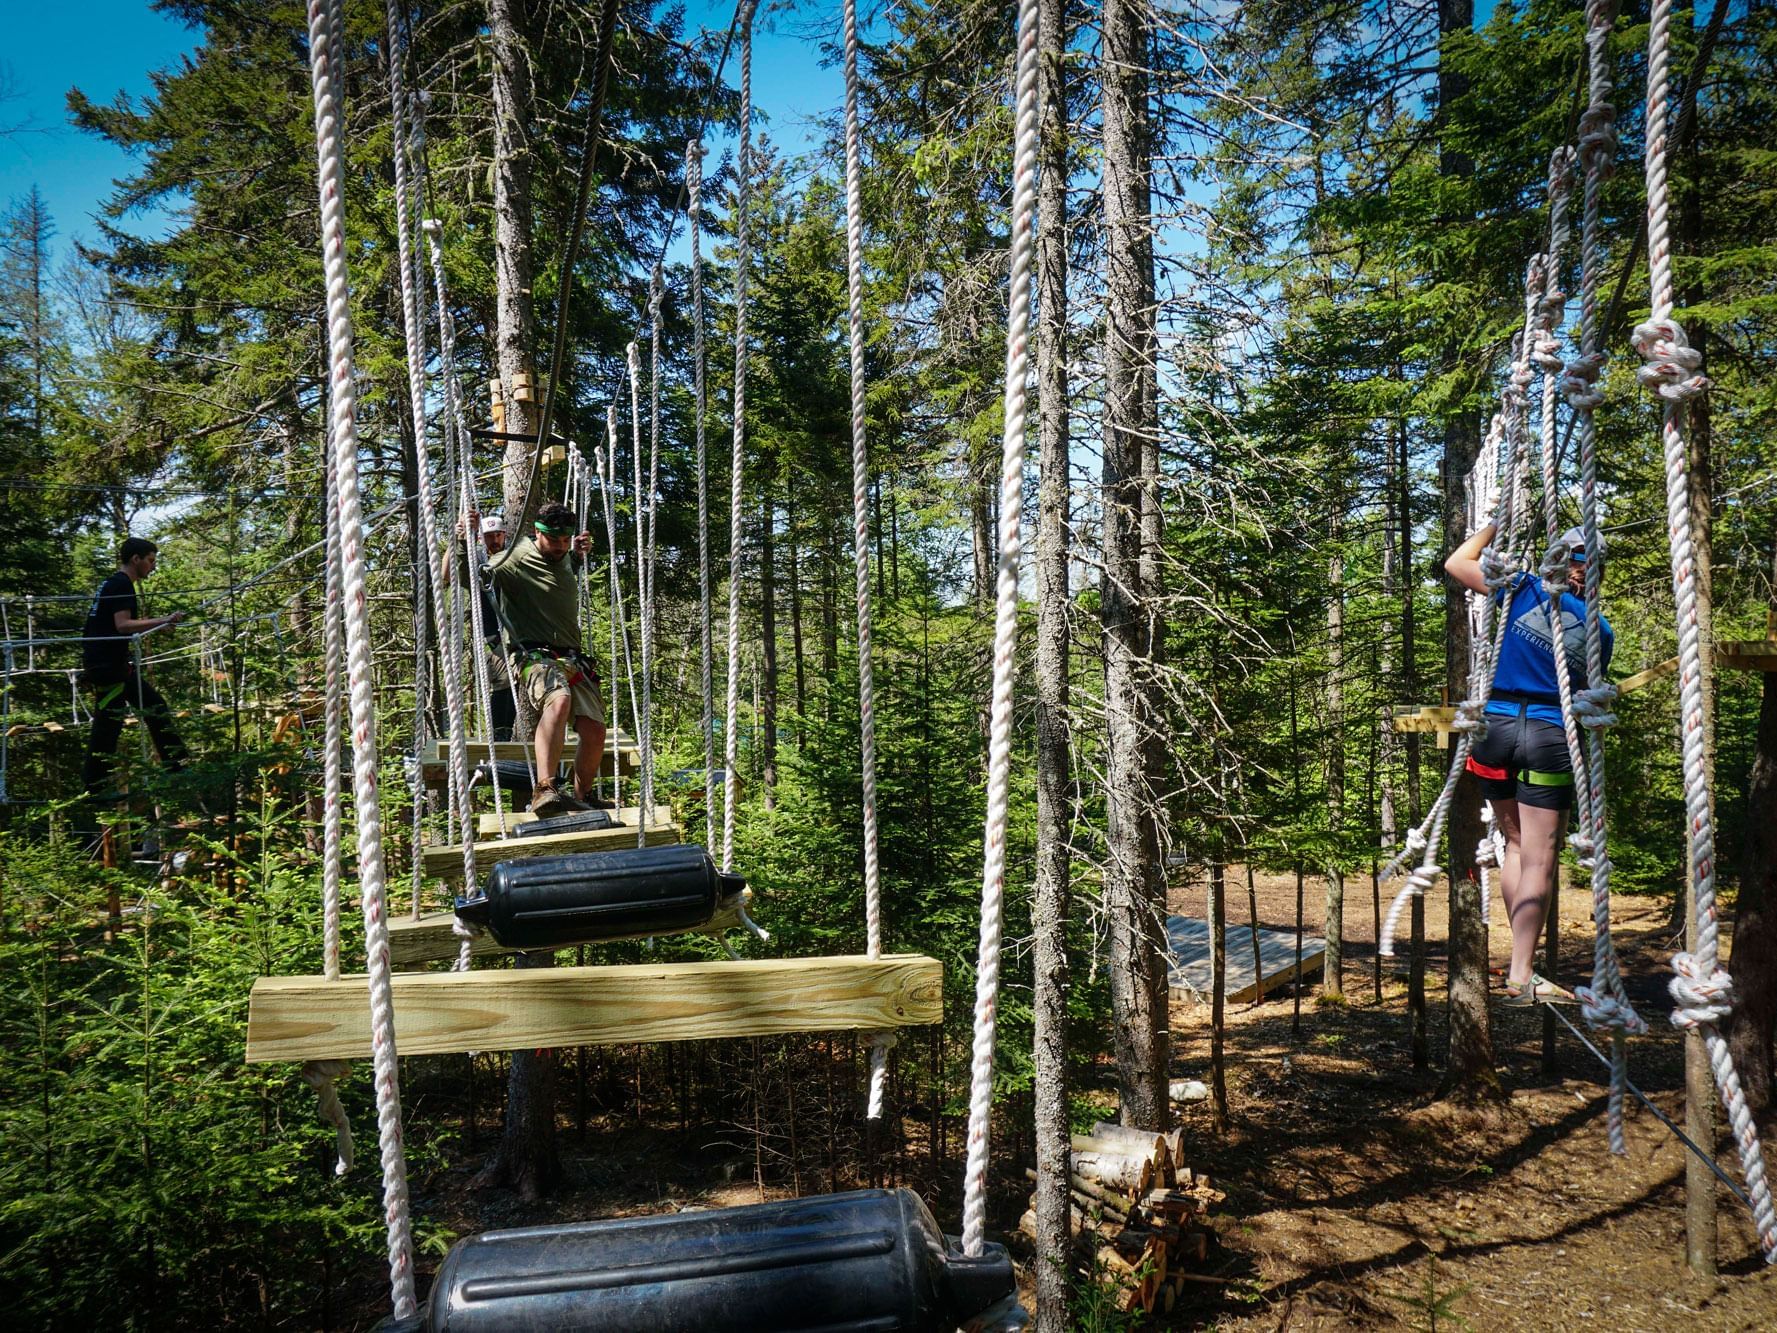 People traversing the ropes course at Experience ADK Outdoors.